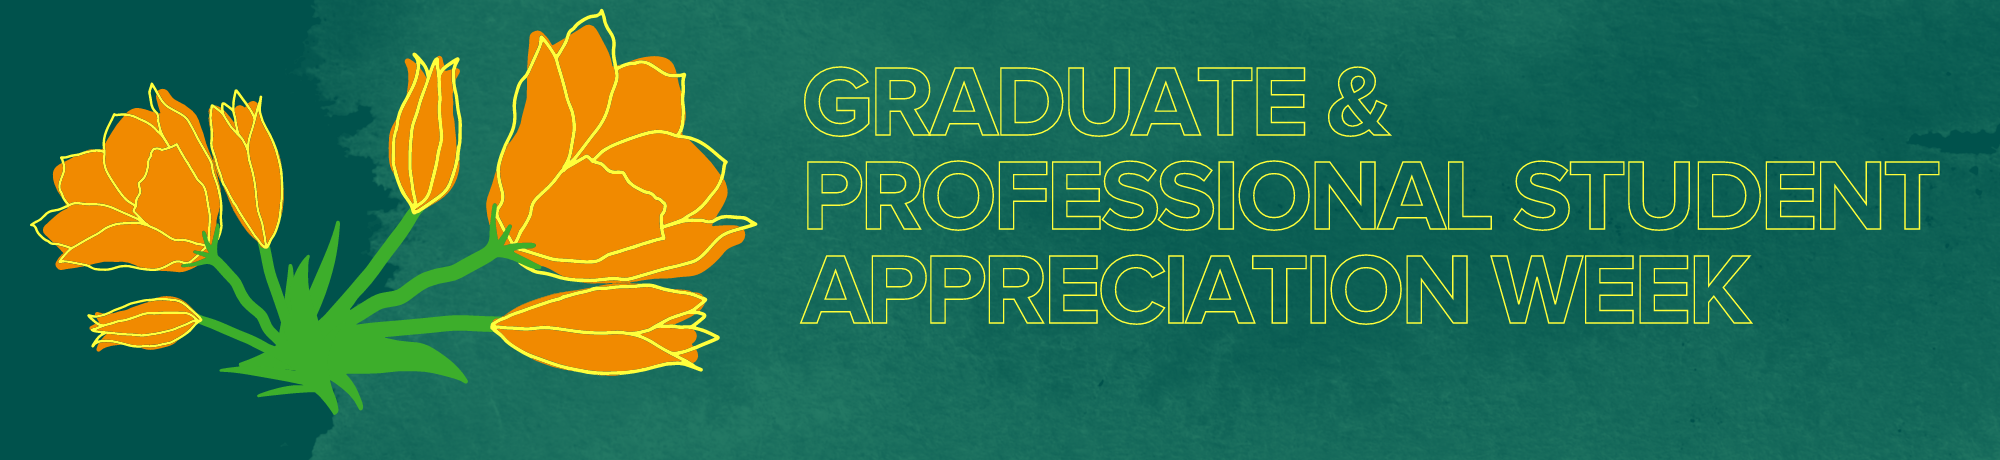 National Graduate and Professional Student Appreciation Week